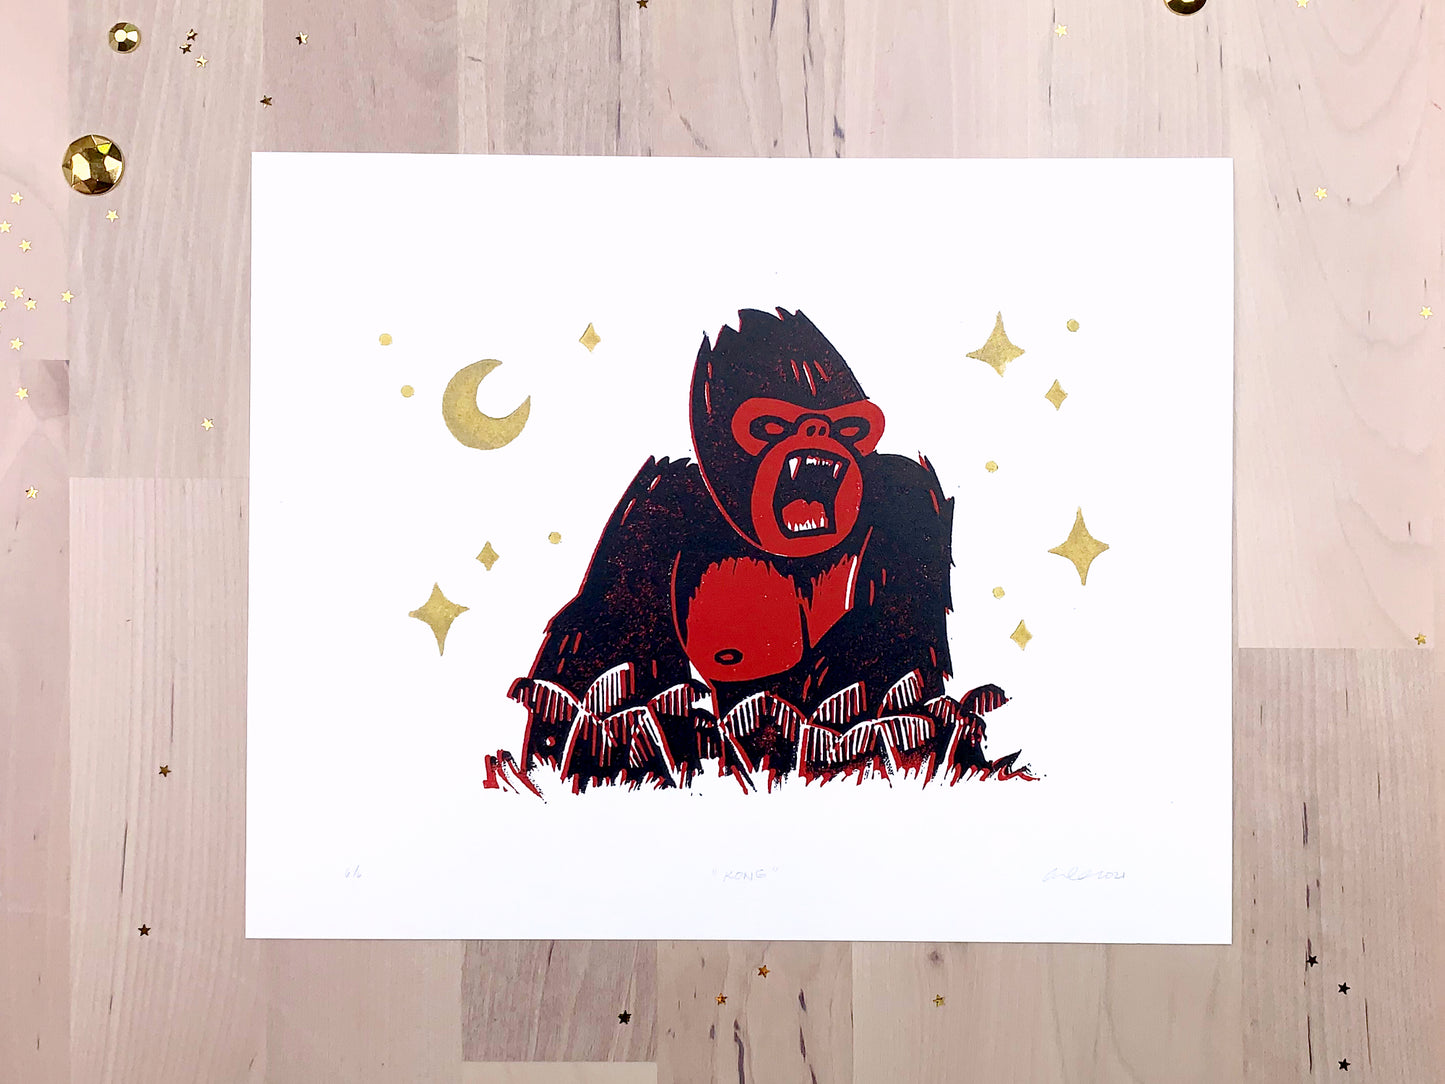 Original limited edition #6 art print by Amber Orenstein. Two color, red and black, reduction block print of a King Kong roaring on his jungle island home with gold stars and moon.